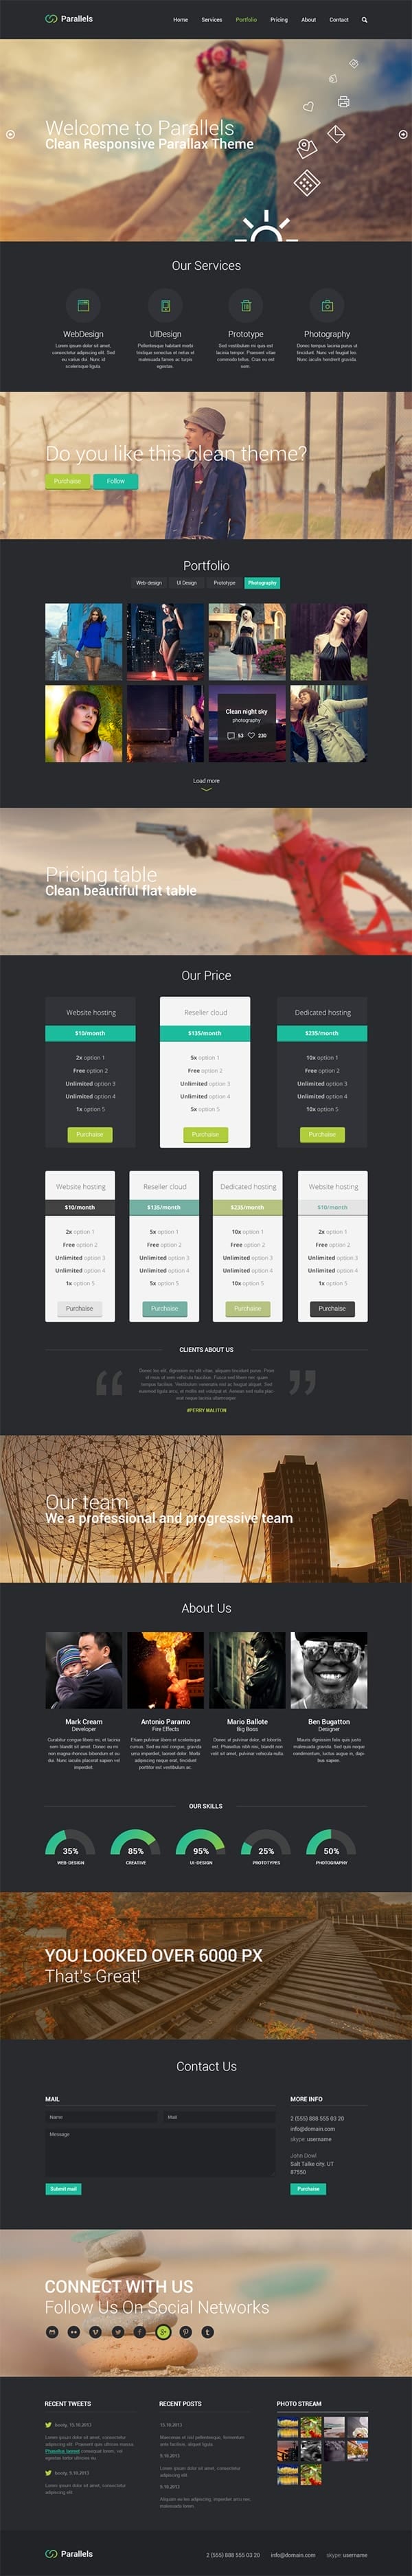 Parallels Free PSD Responsive Template